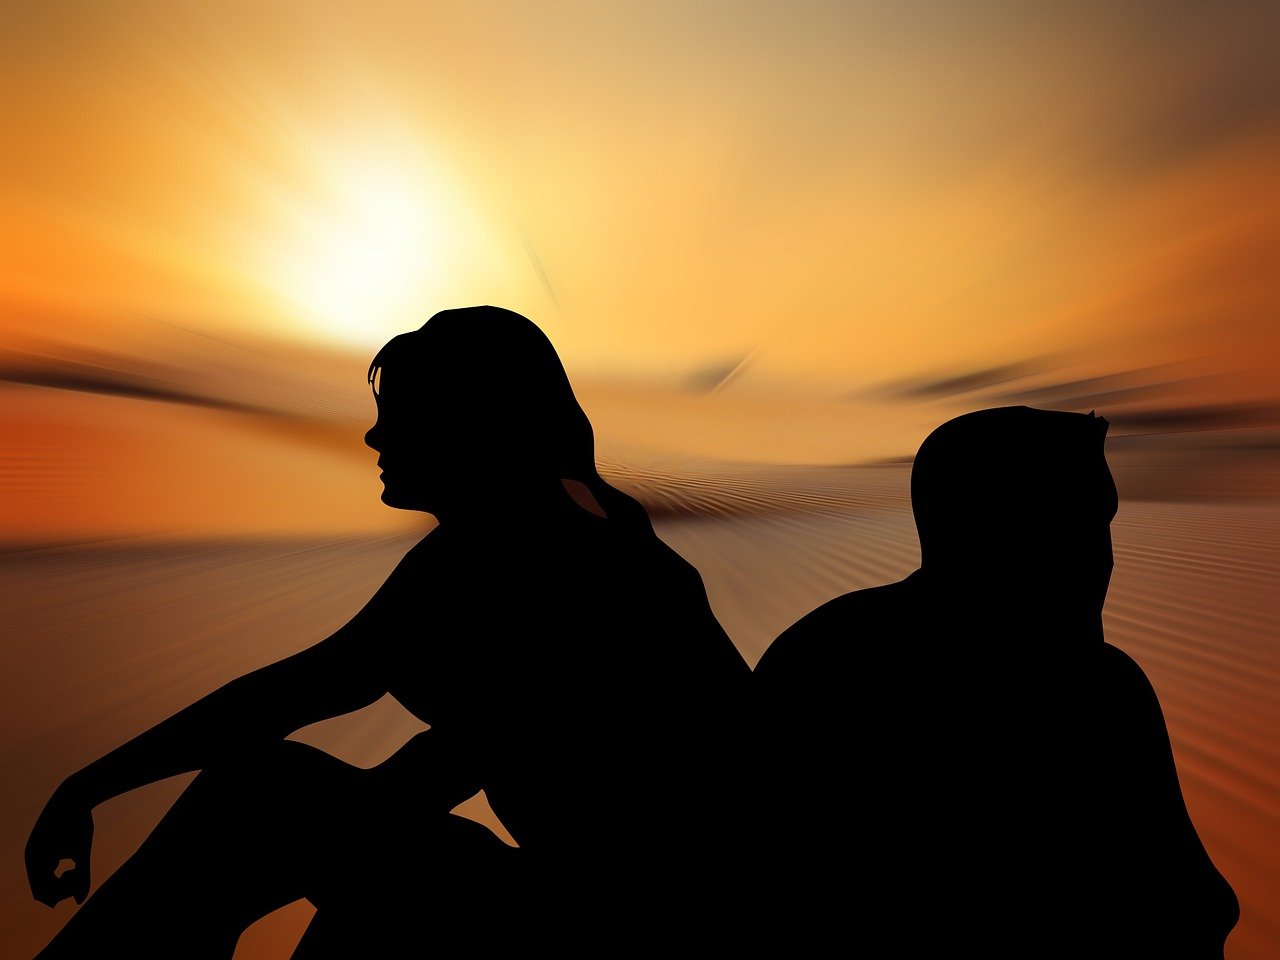 a silhouette of a man and a woman sitting next to each other, a picture, by Kuno Veeber, pixabay, romanticism, unhappy, in a golden sunset sky, rendered image, stock photo